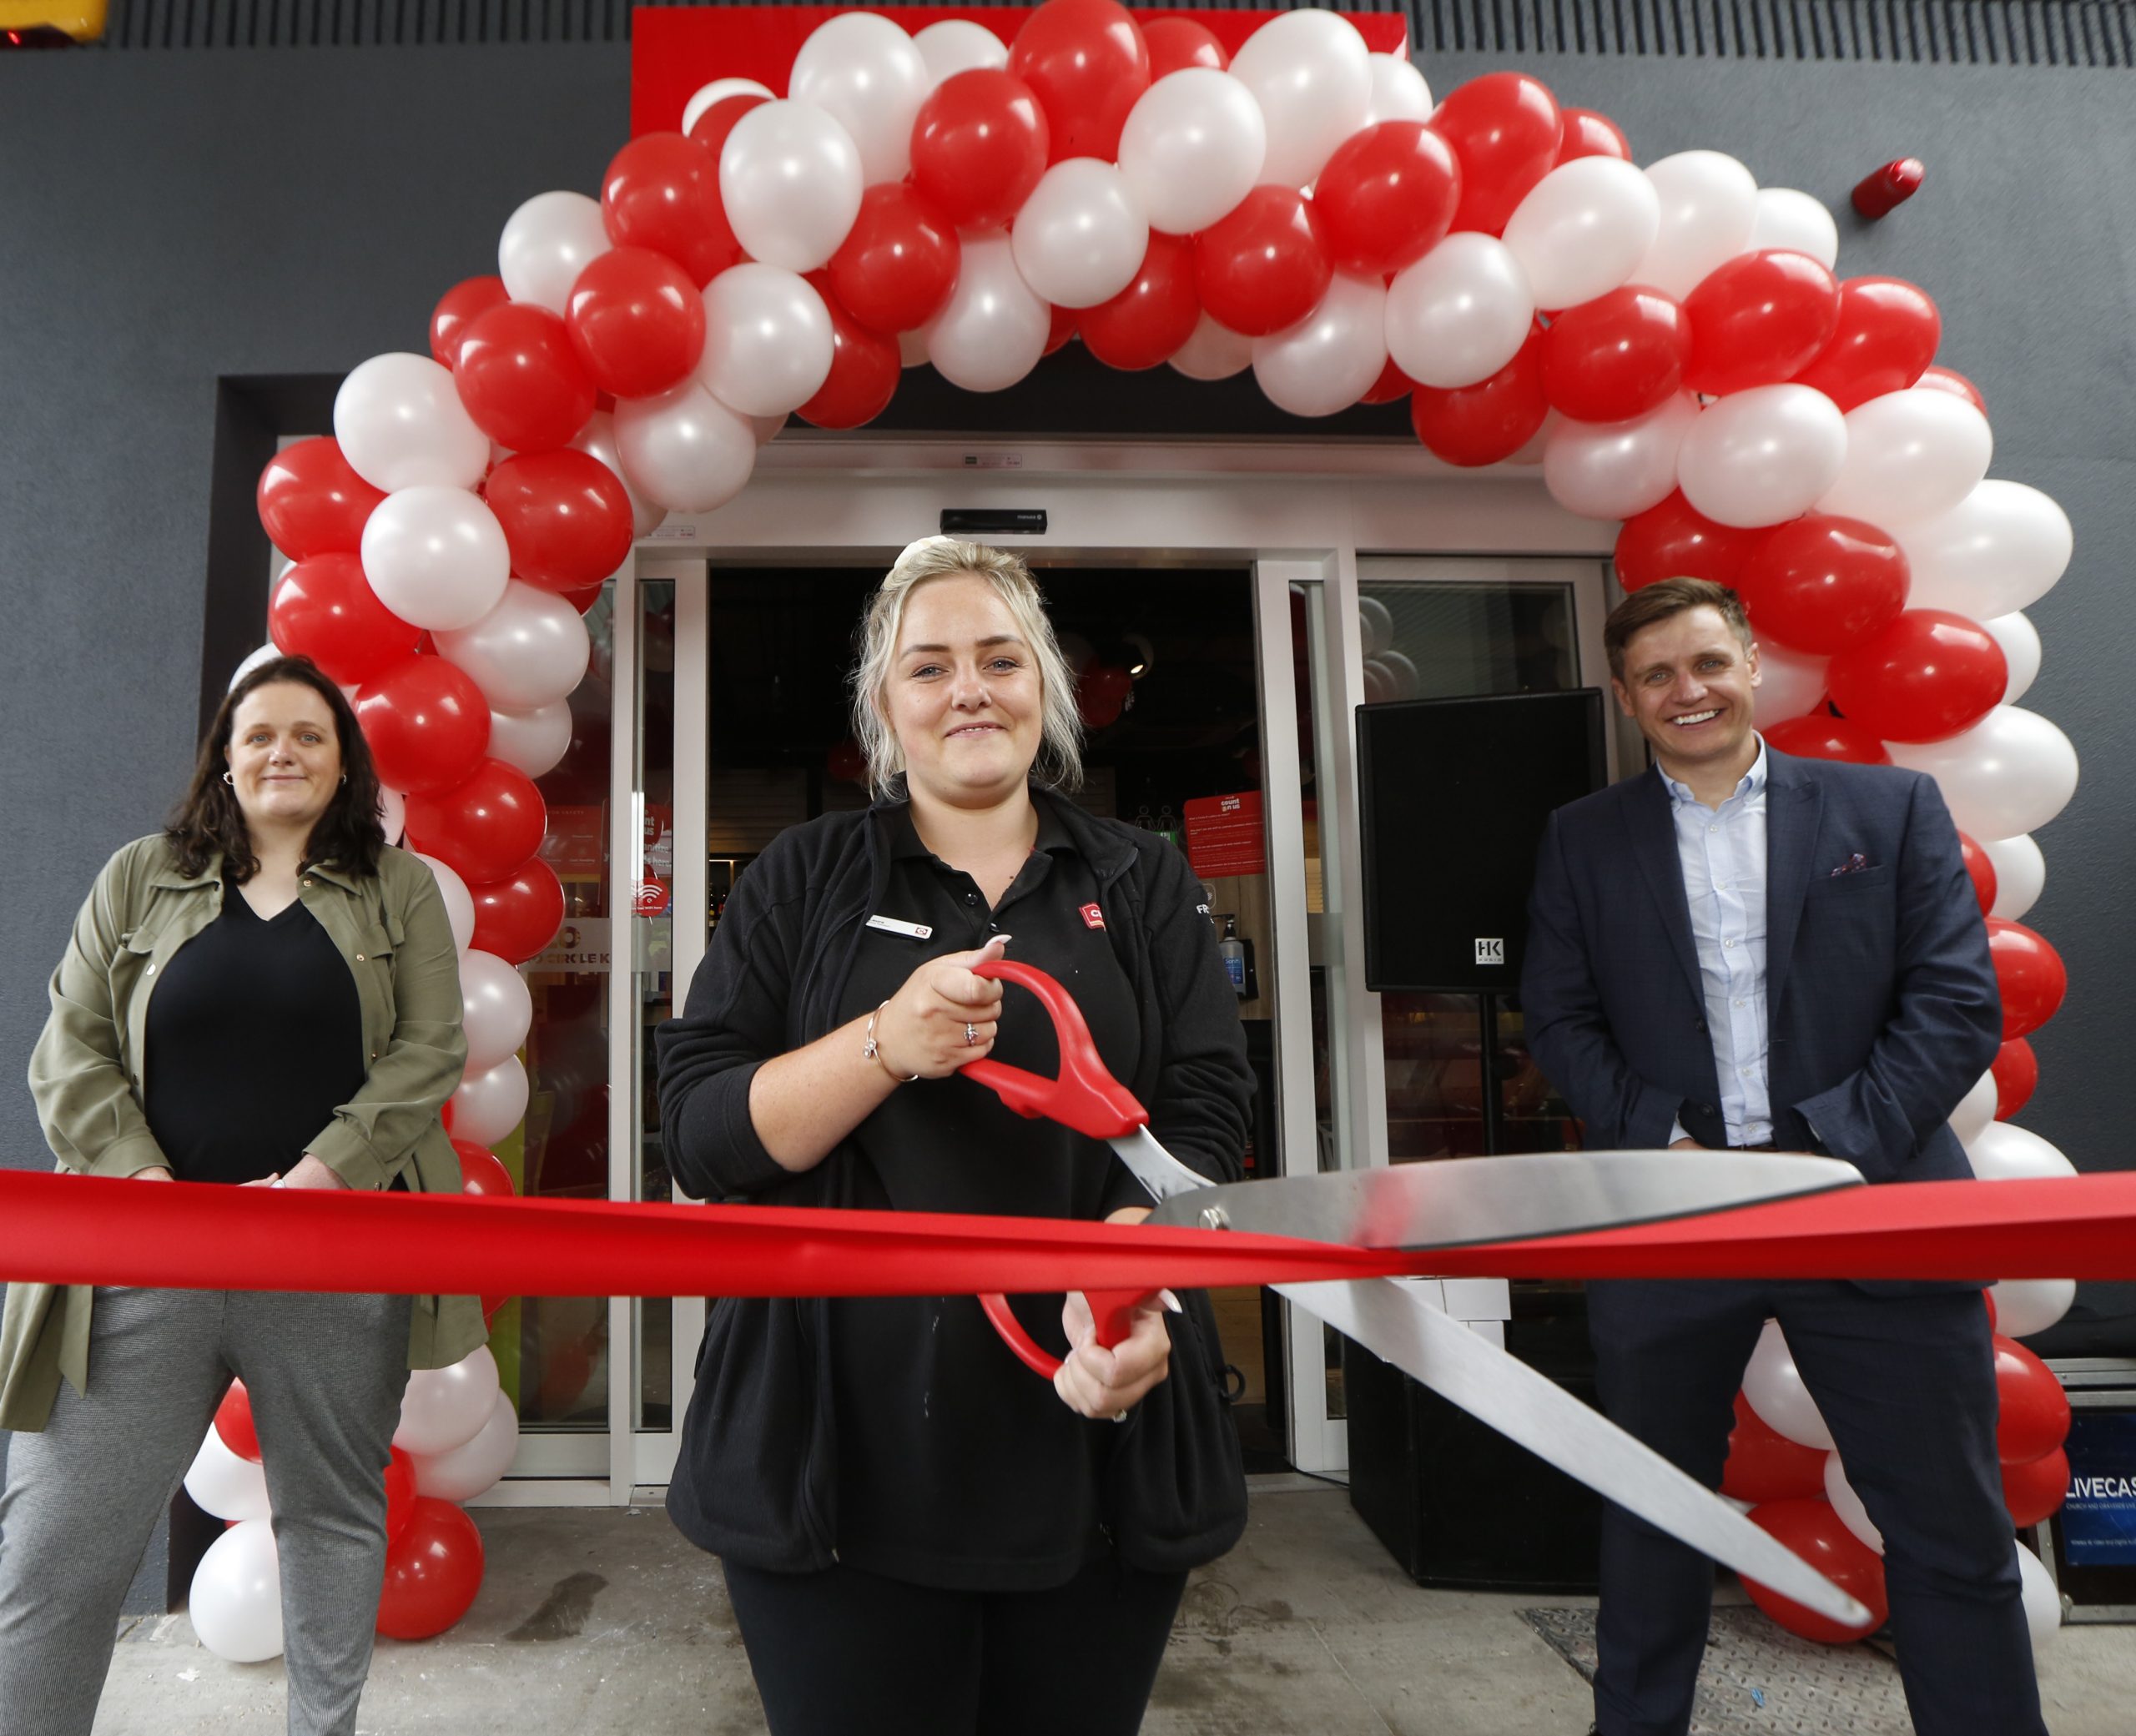 Circle K unveils renovated service station in Brennanstown, Bray